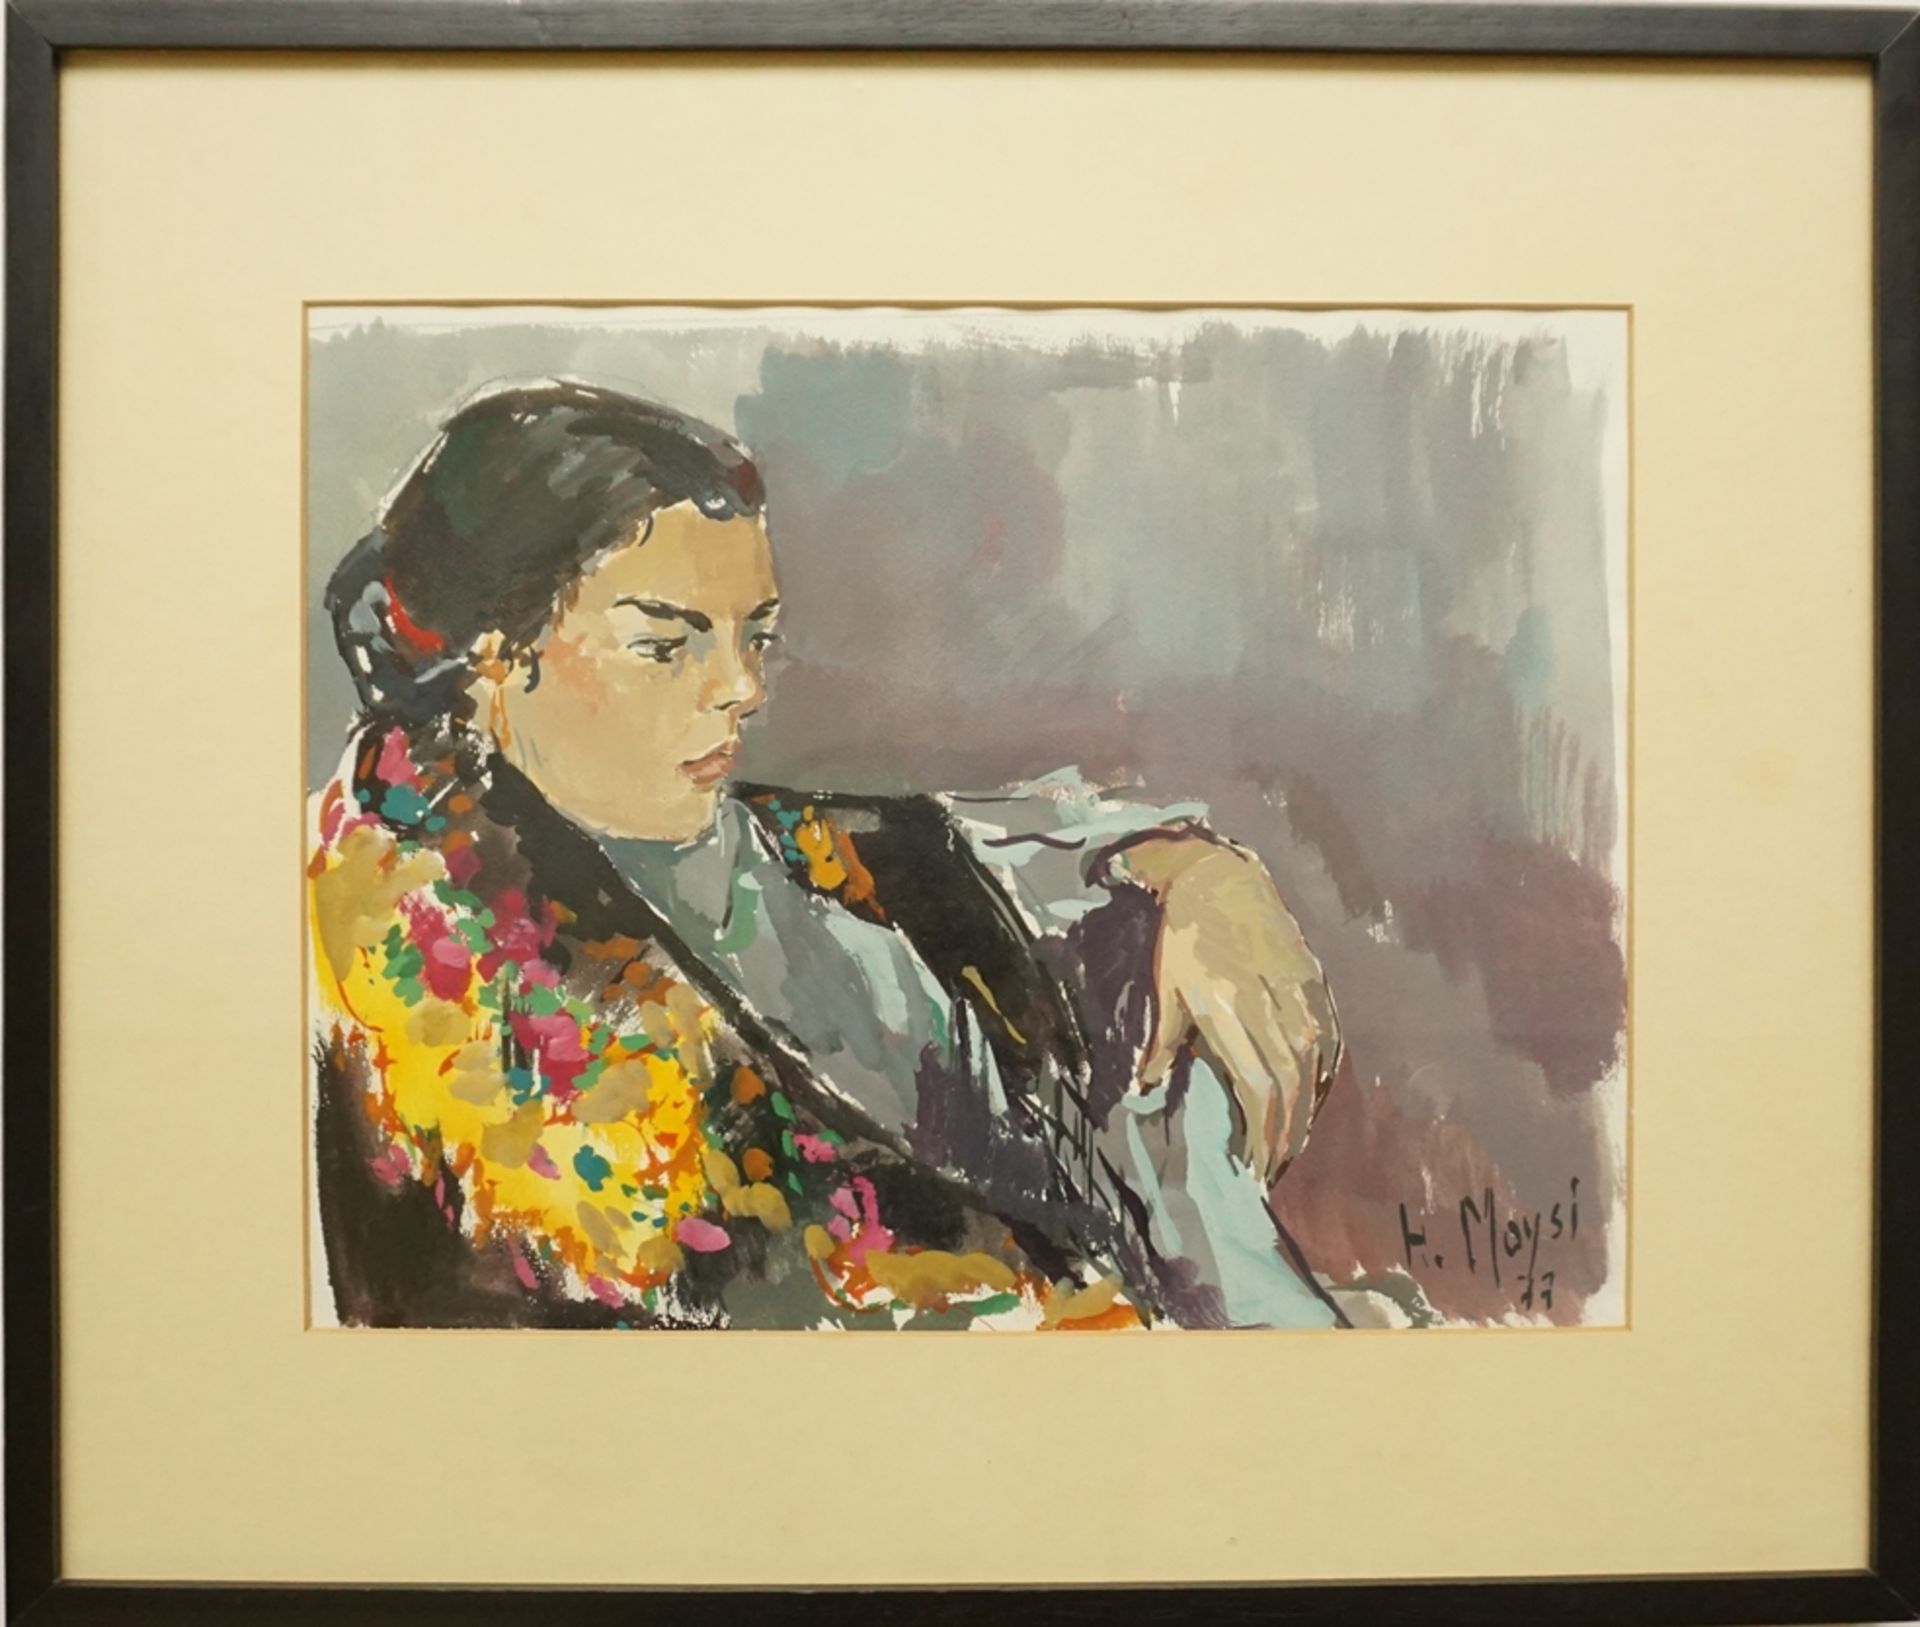 H. Moysi "Portrait of a woman", 1977, acrylic/paper - Image 2 of 2